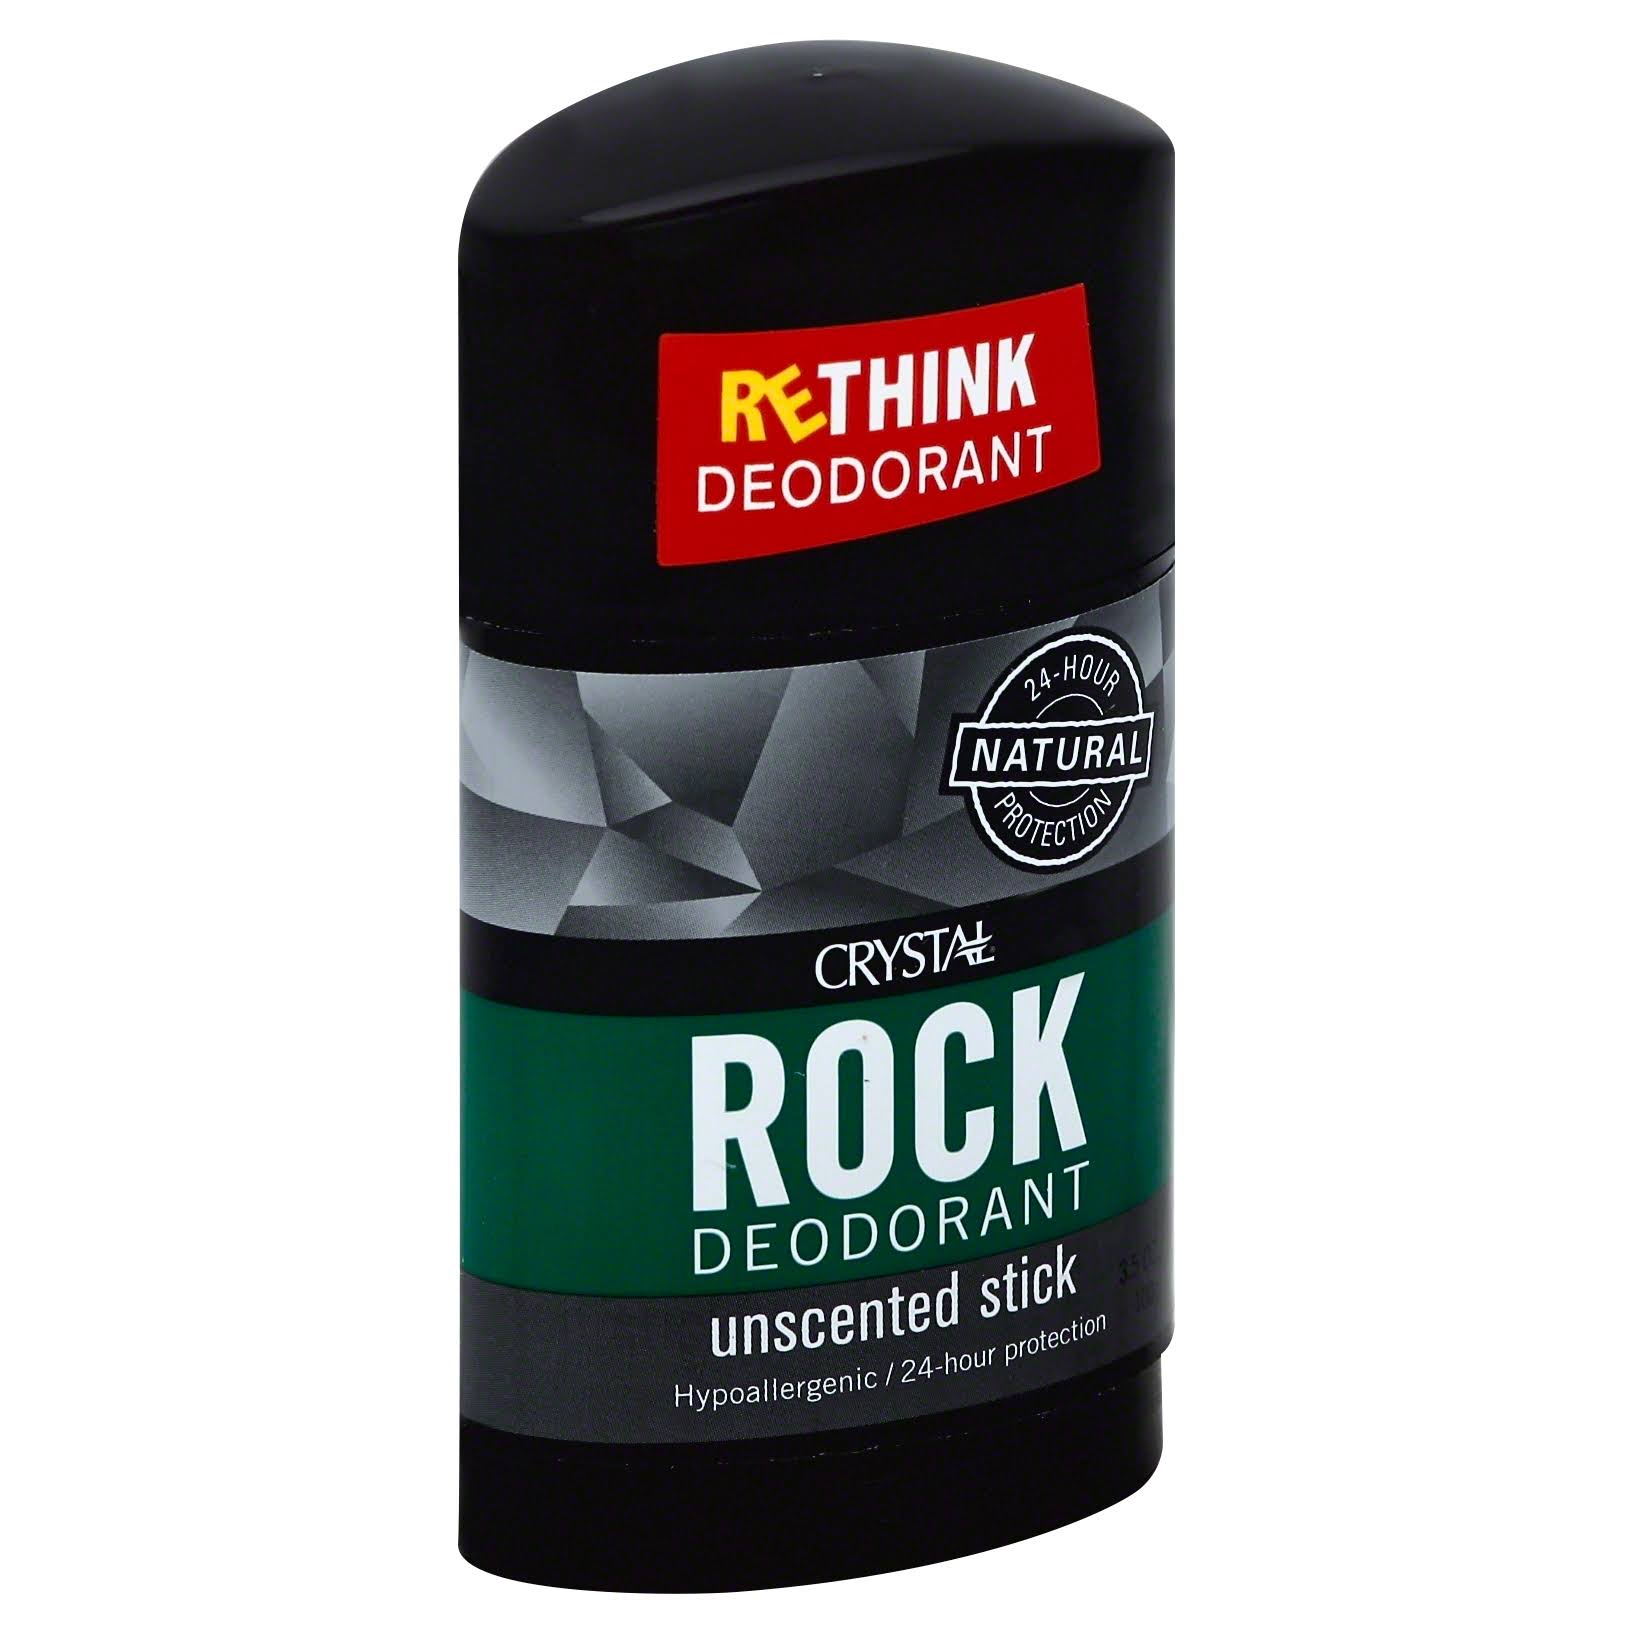 Crystal Rock Deodorant - Unscented, 100g